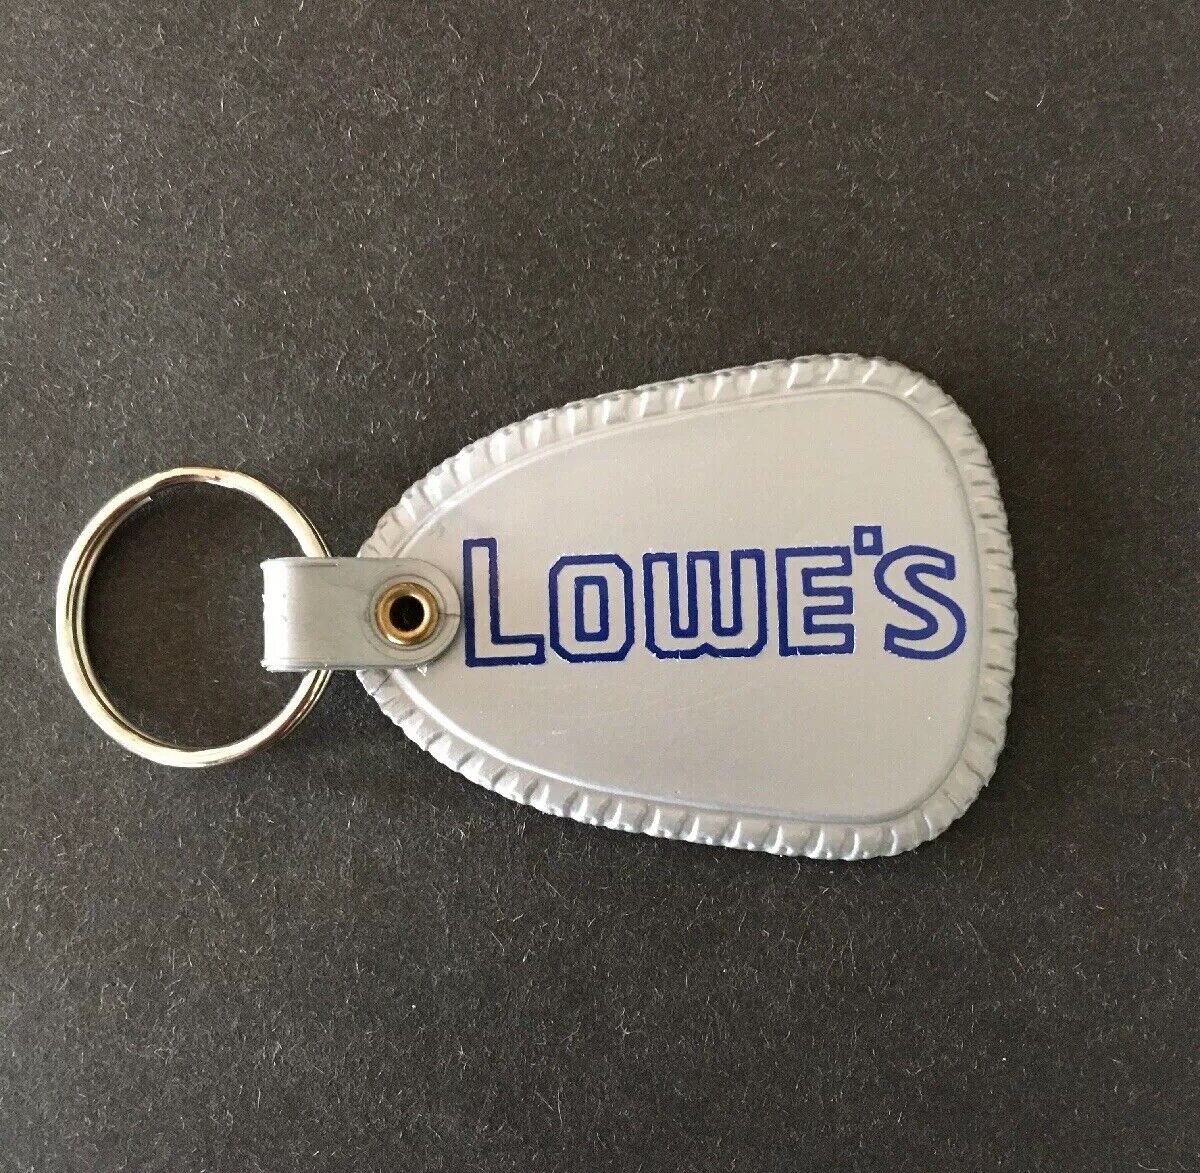 Vintage Keychain LOWE’S Key Fob Ring Home Improvement Hardware American Retail